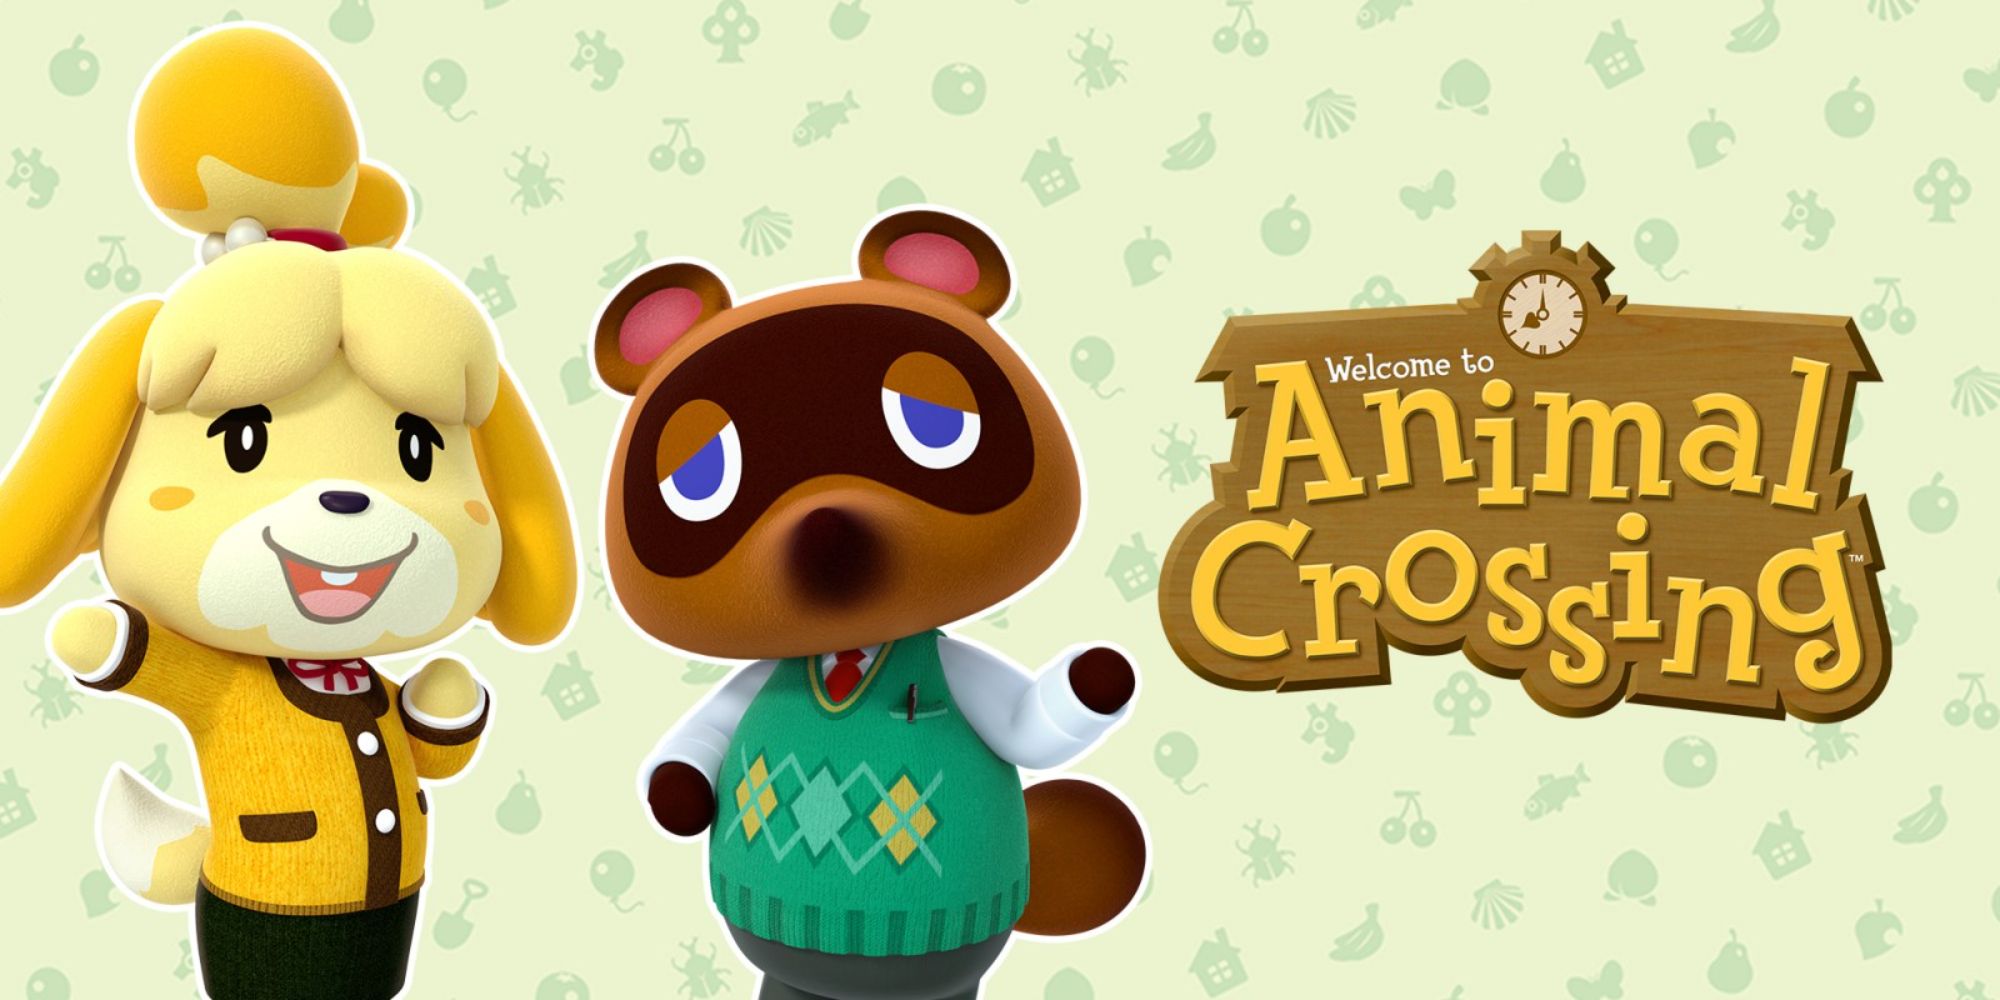 An official Animal Crossing: New Horizons poster, with Tom Nook and Isabelle waving on the left.